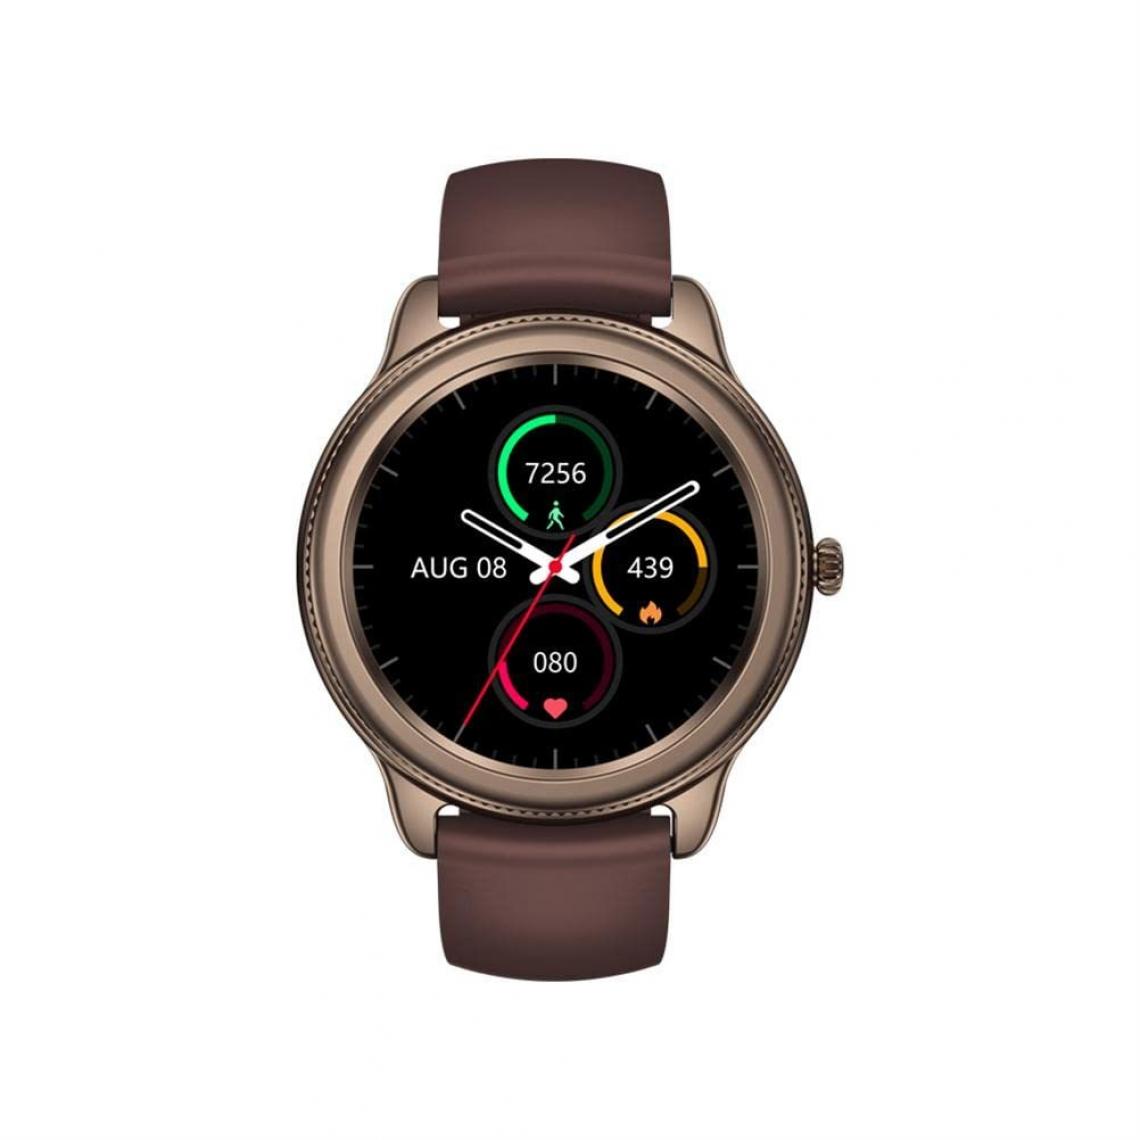 Chronotech Montres - Chronus Women's Smartwatch, Heart Rate Detection, IP68 Waterproof Smartwatch Compatible with Android iOS (Brown) - Montre connectée